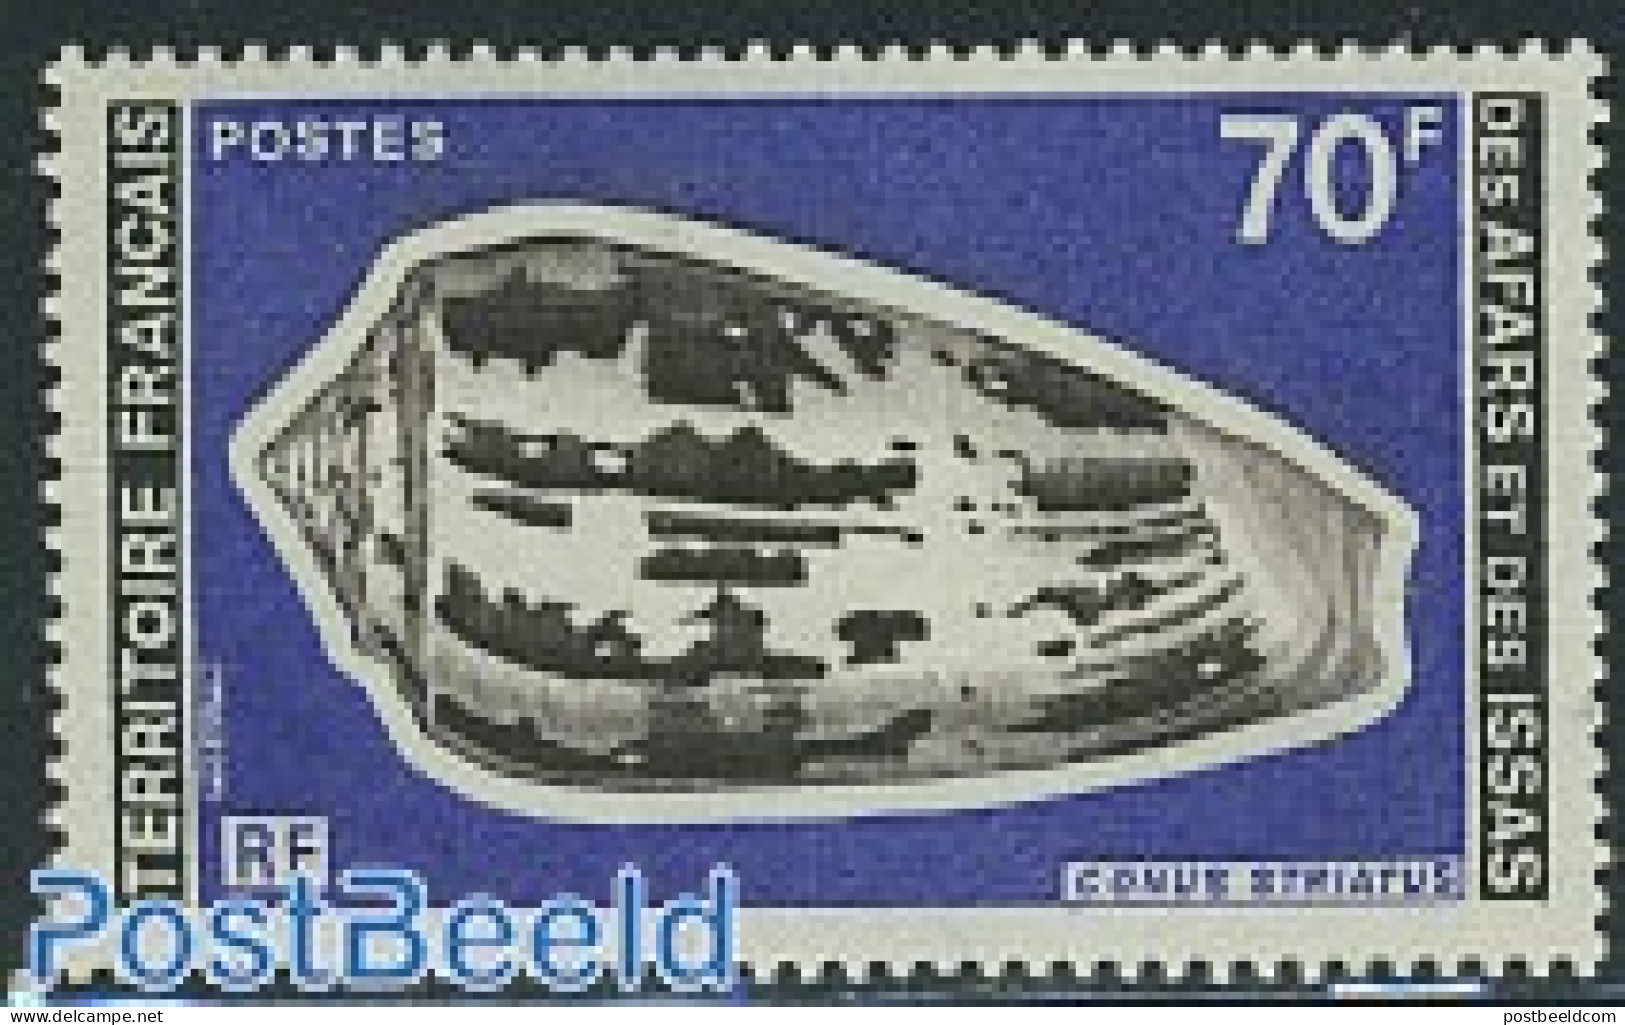 Afars And Issas 1977 Stamp Out Of Set, Mint NH, Nature - Shells & Crustaceans - Ungebraucht